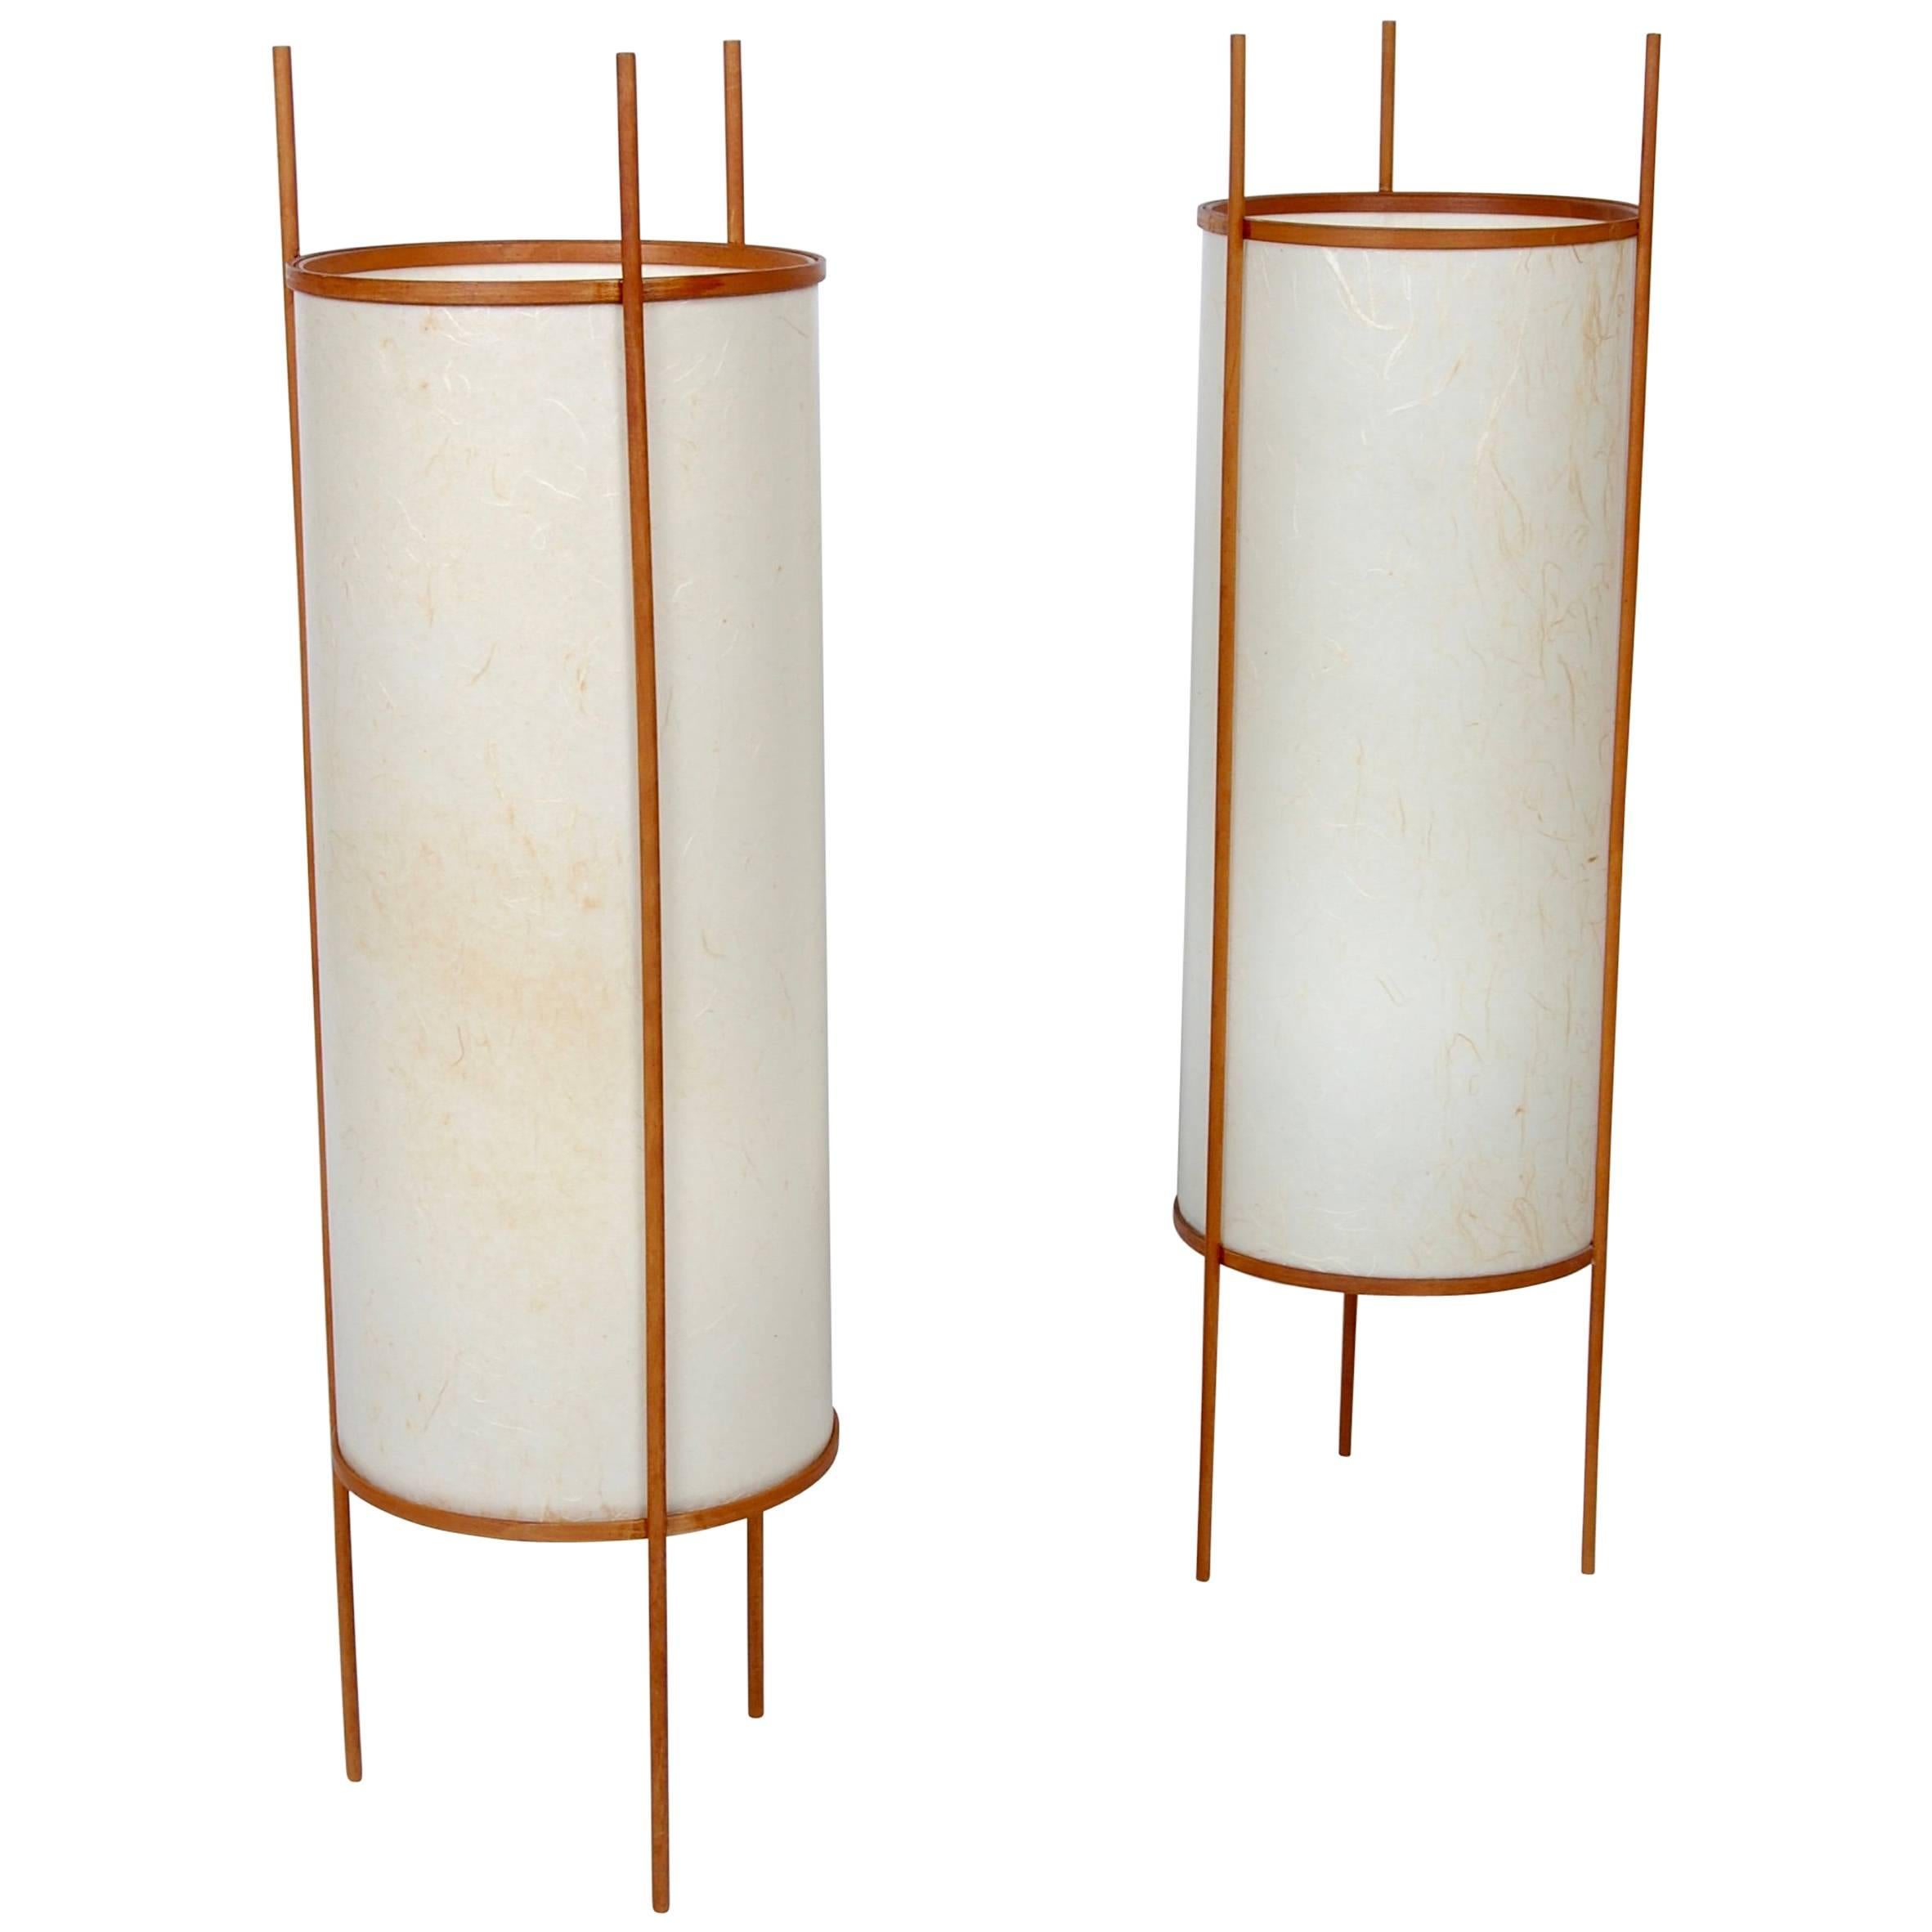 Japanese Noguchi Style Table or Floor Lamps